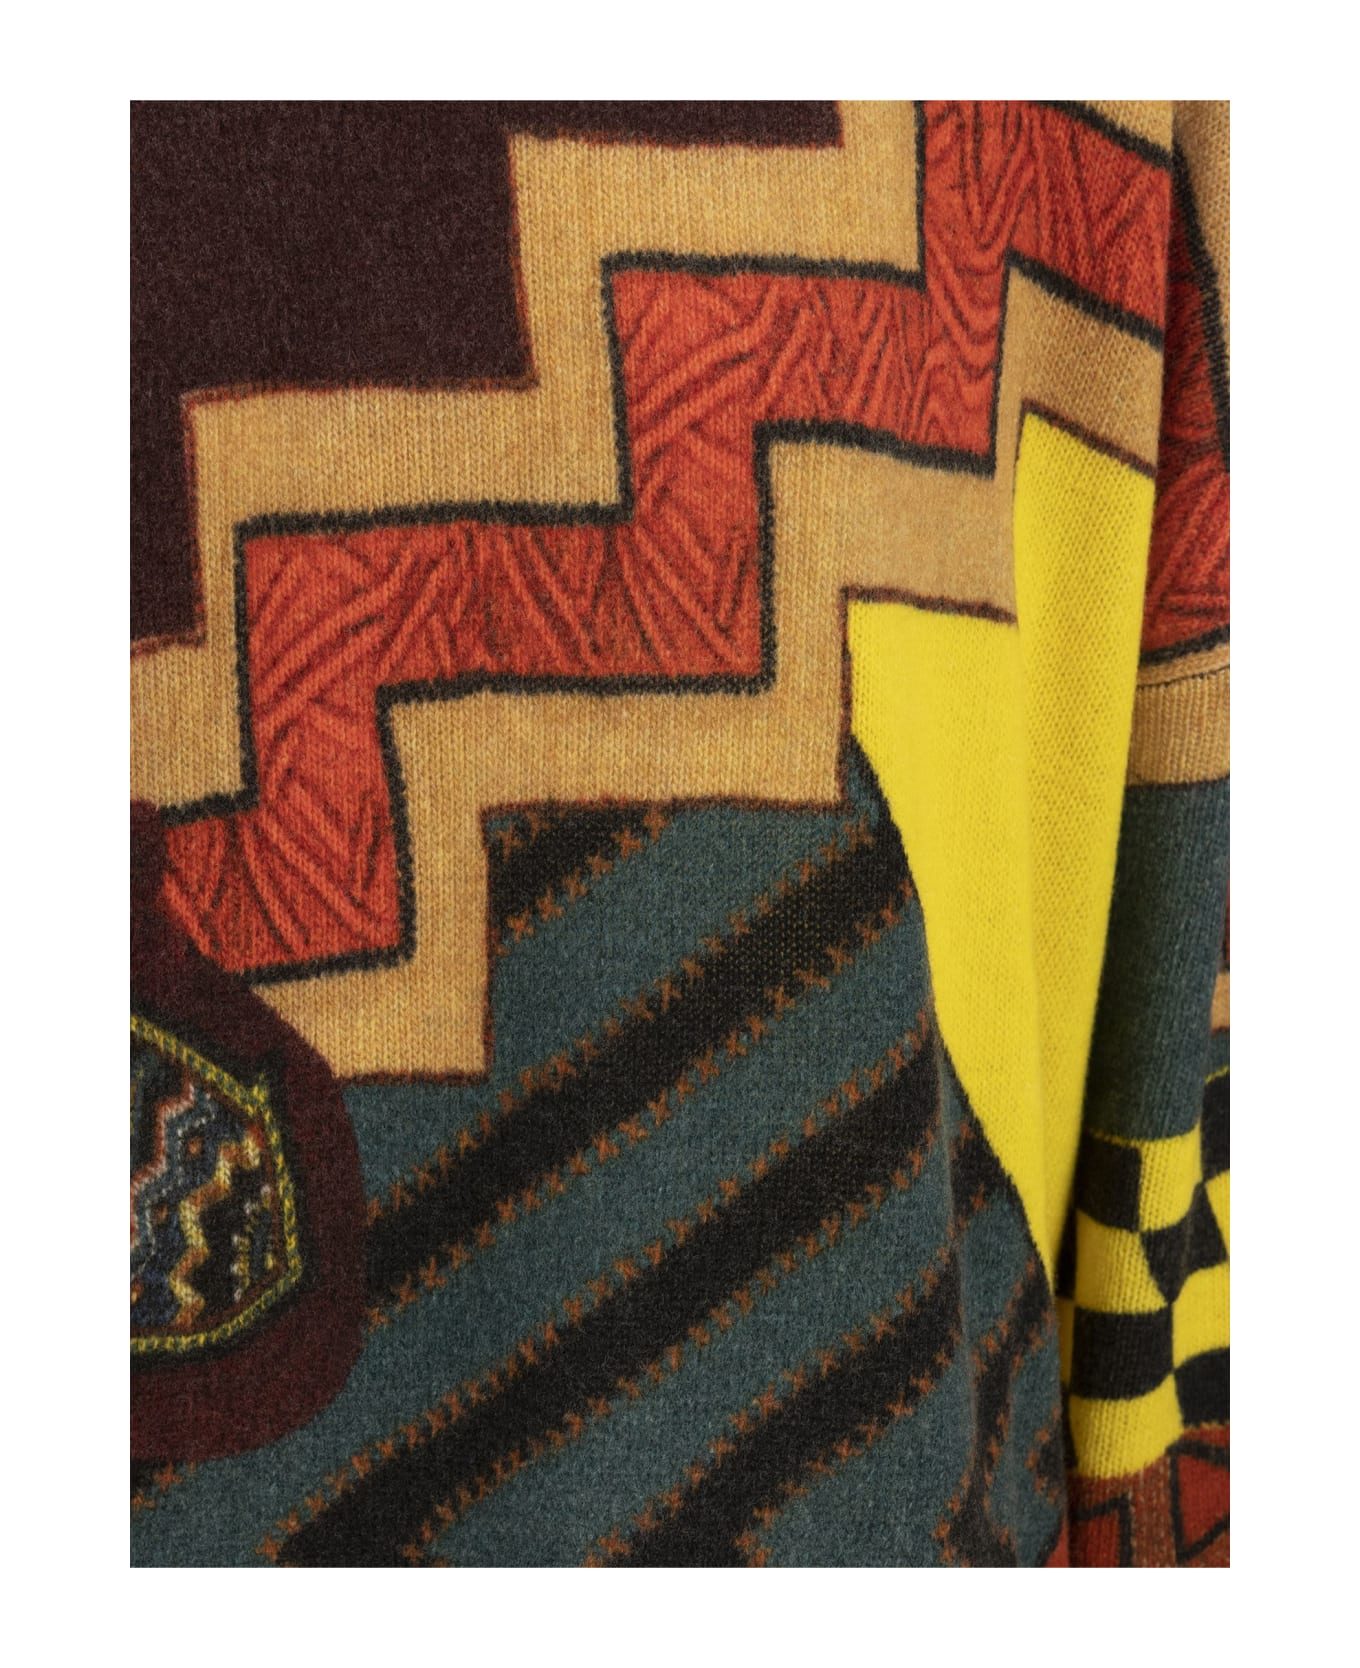 Etro Wool Sweater With Patchwork Print - Bordeaux